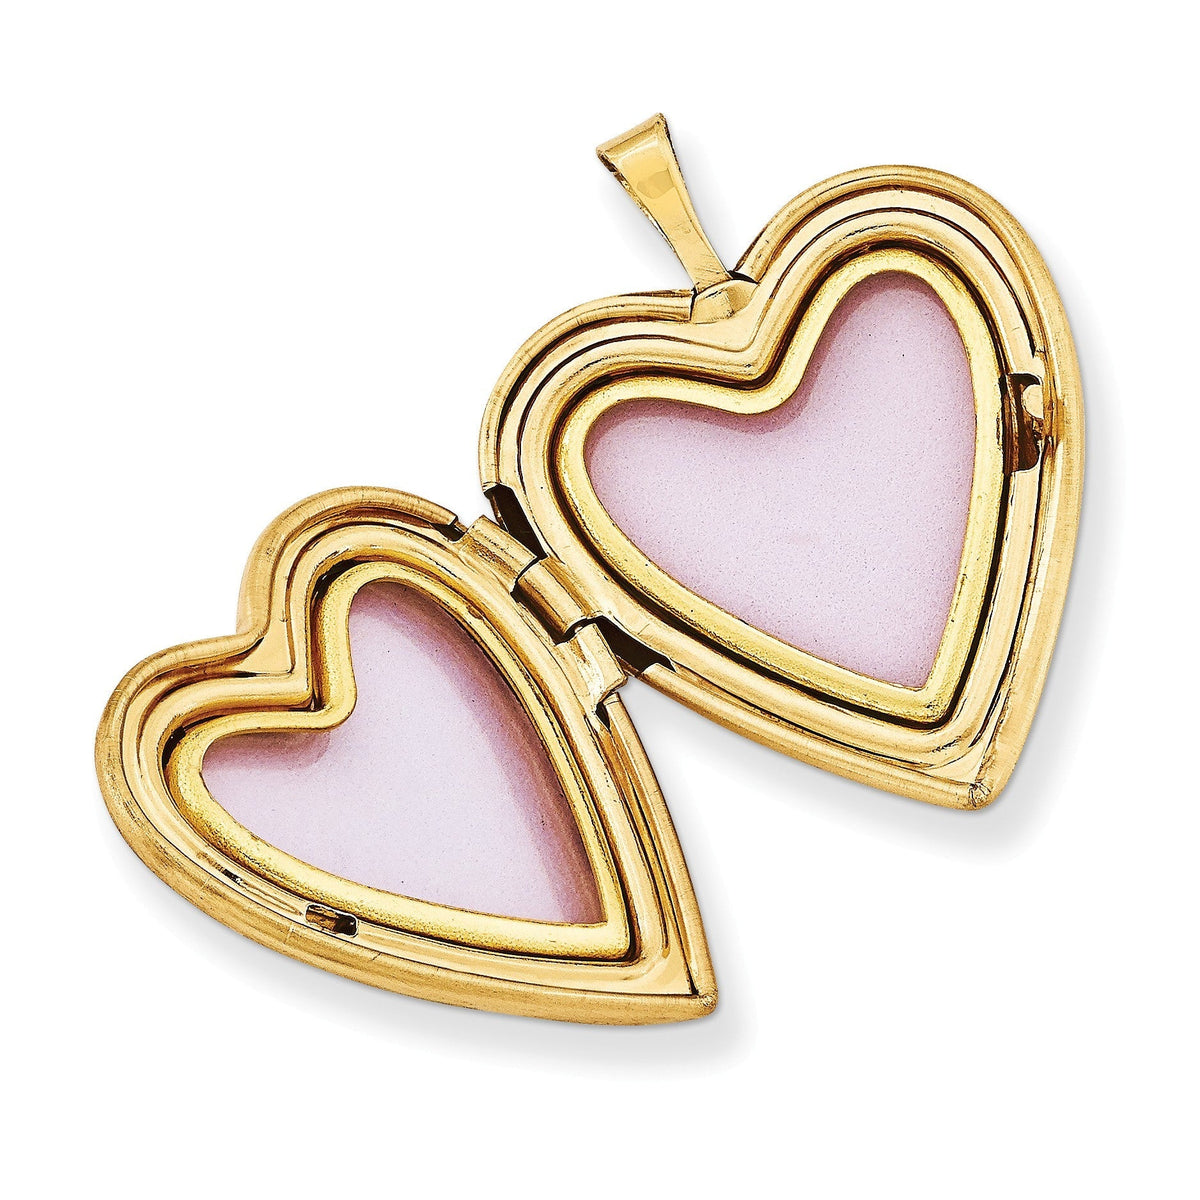 Alternate view of the 14k Yellow Gold and Enamel Mom Floral Heart Locket, 20mm by The Black Bow Jewelry Co.